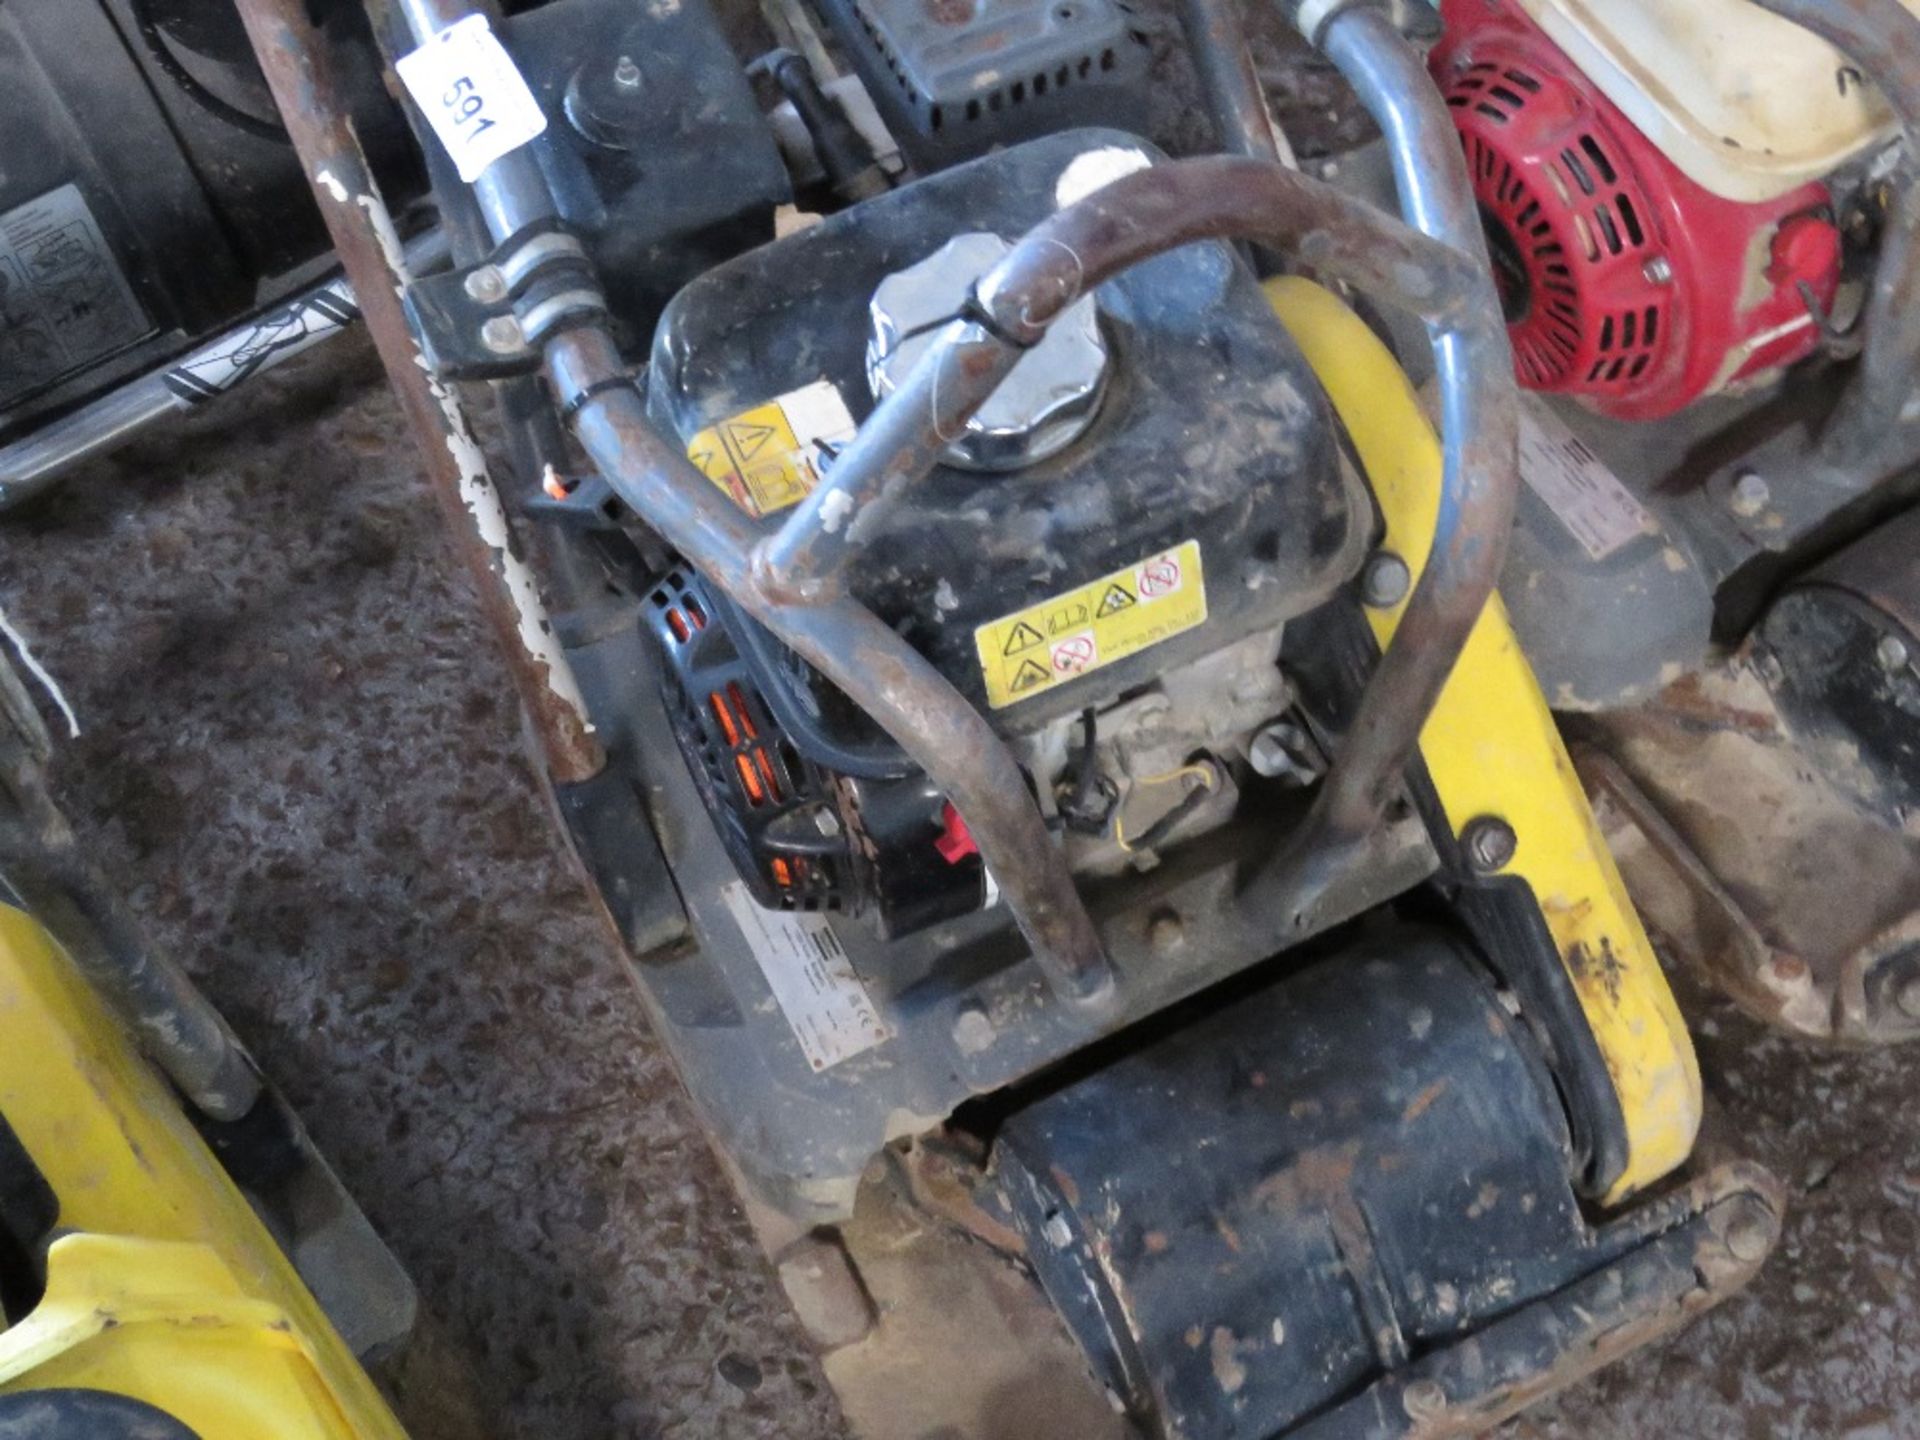 ATLAS COPCO PETROL ENGINED COMPACTION PLATE. - Image 2 of 2